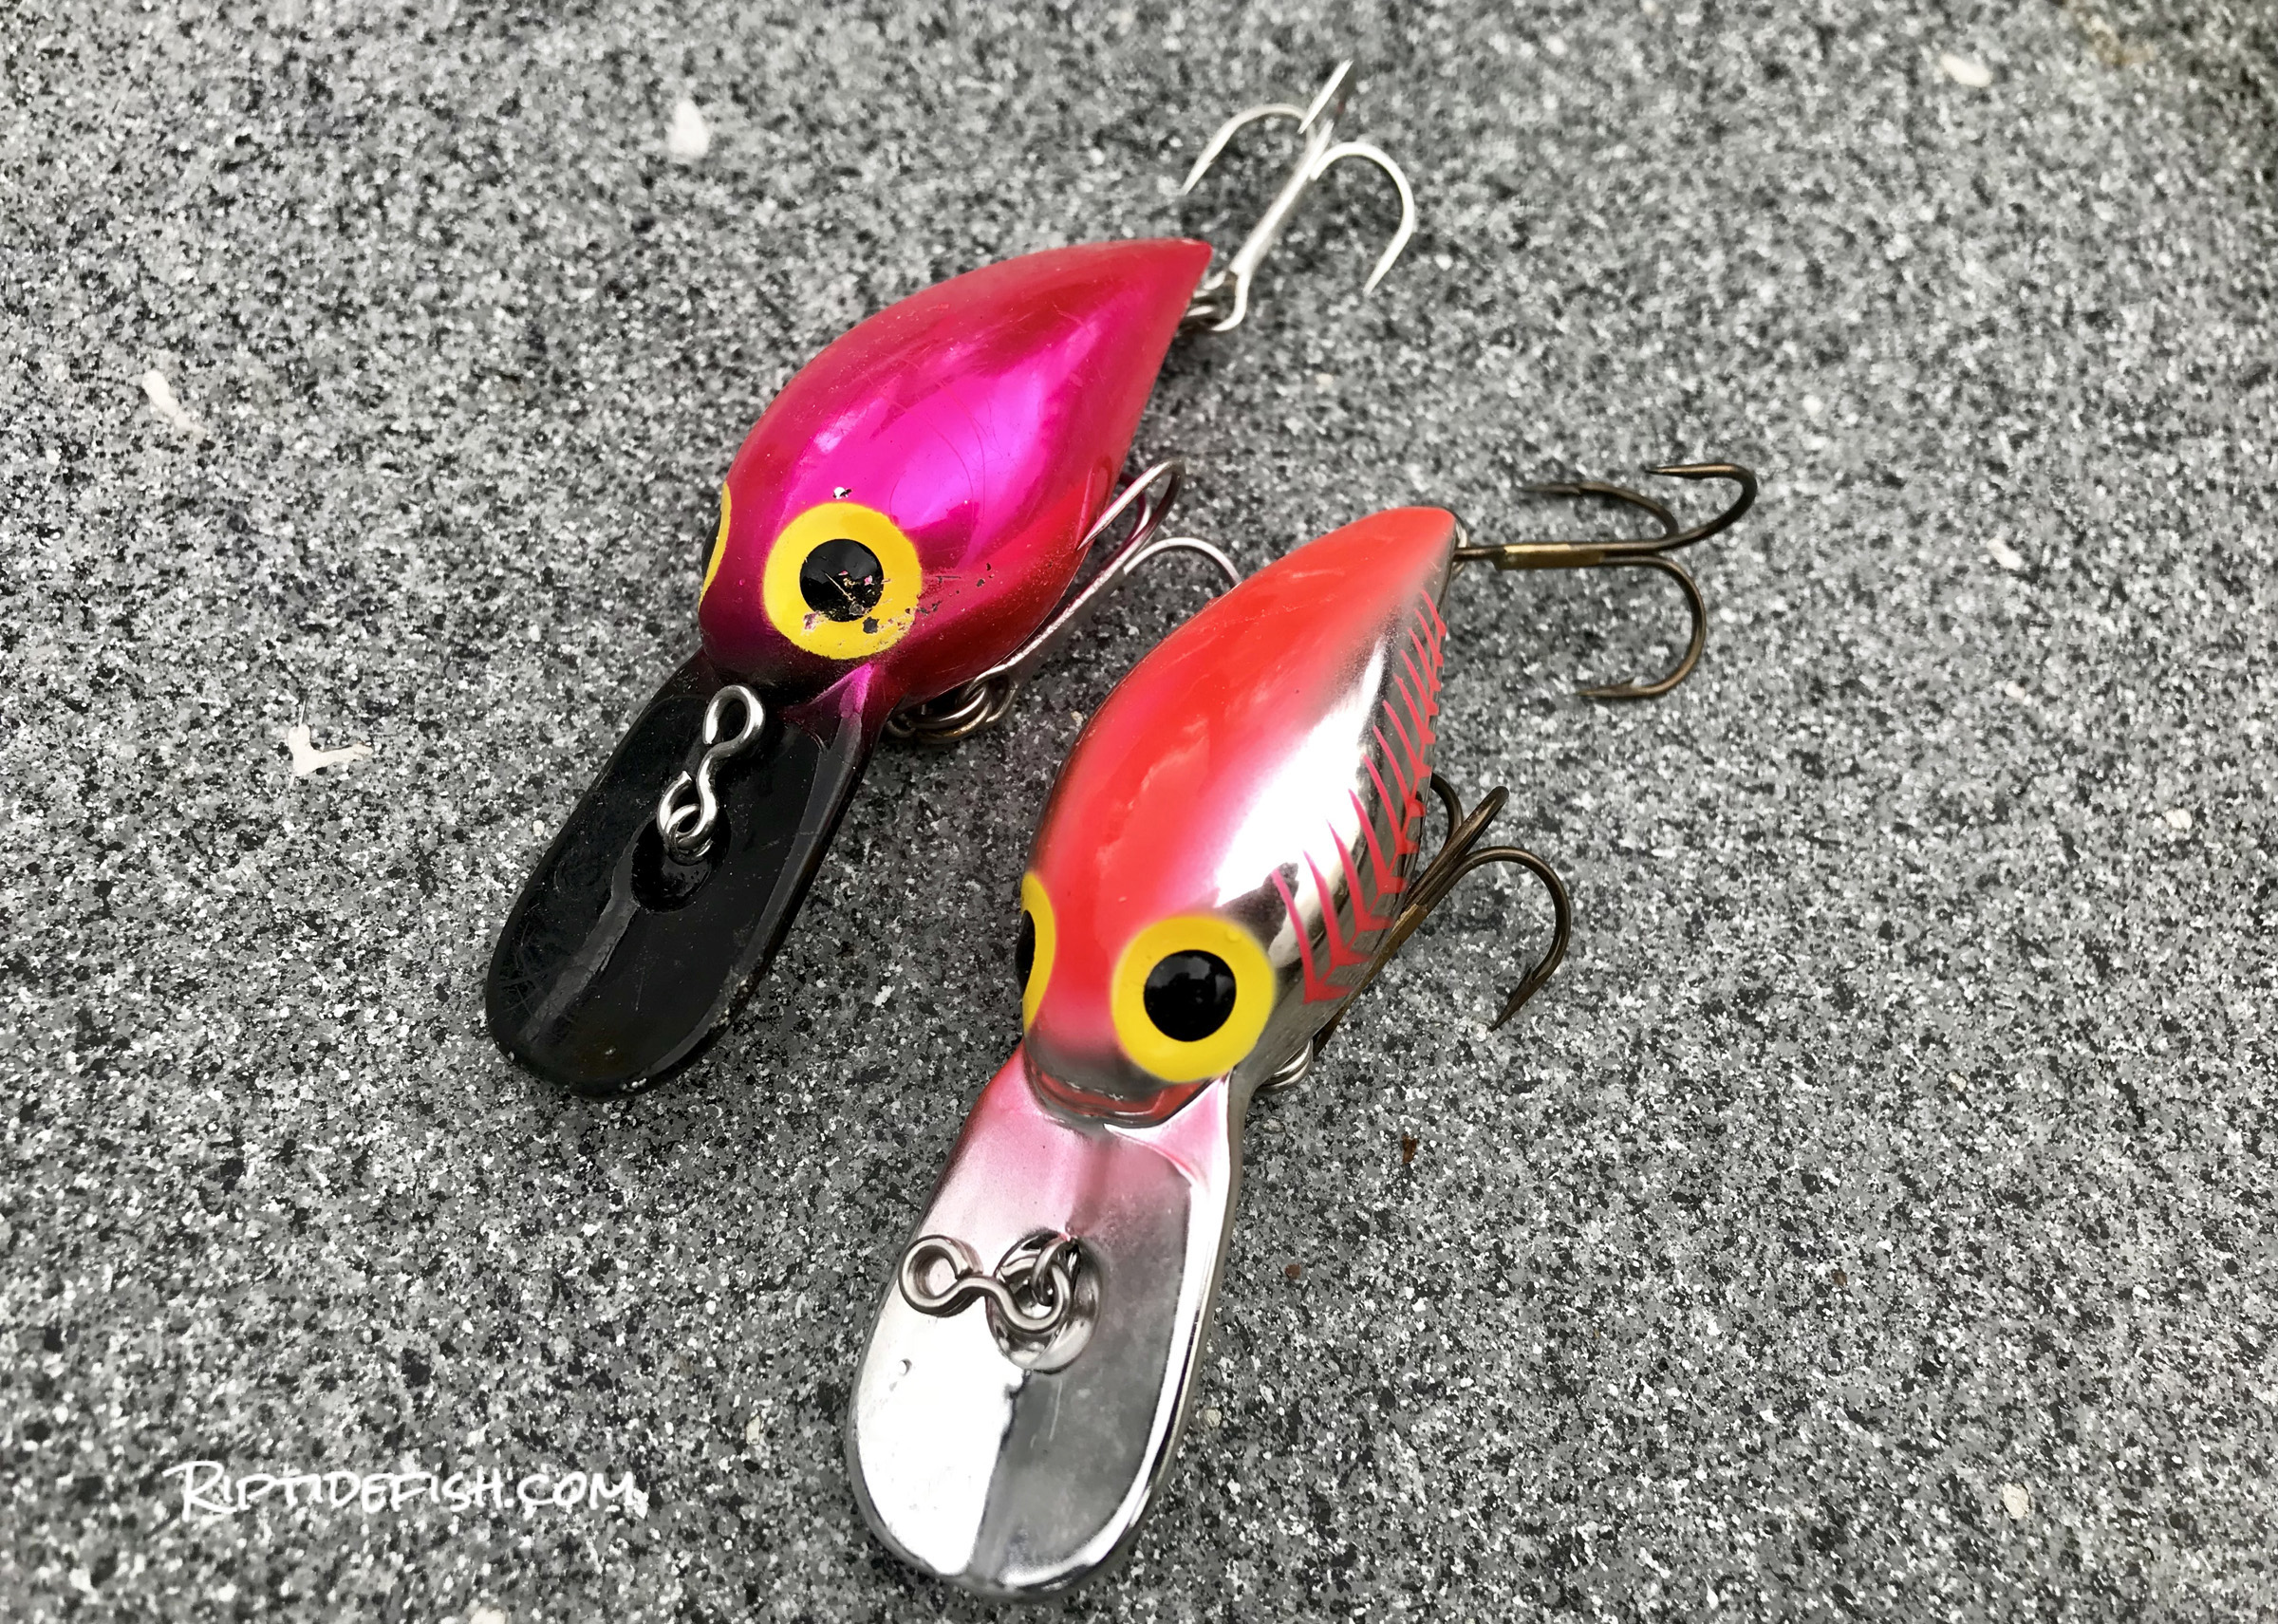 Great lures for catching Coho Salmon in rivers.